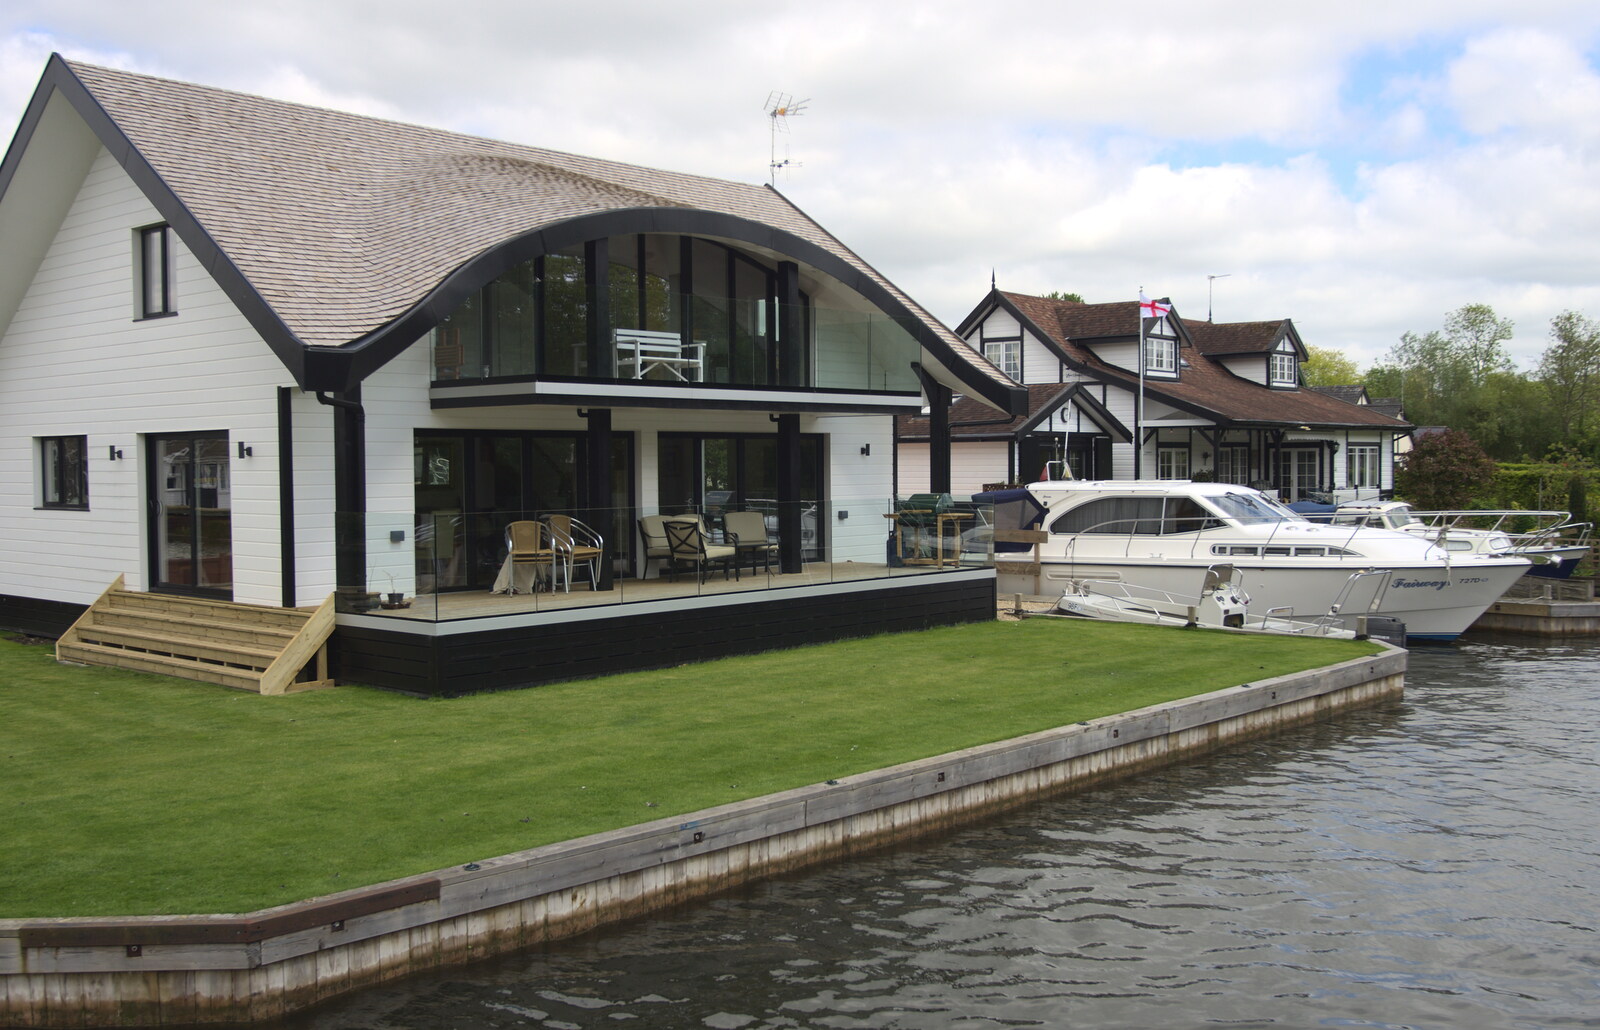 Another fancy residence from A Trip on the Norfolk Broads, Wroxham, Norfolk - 25th May 2013